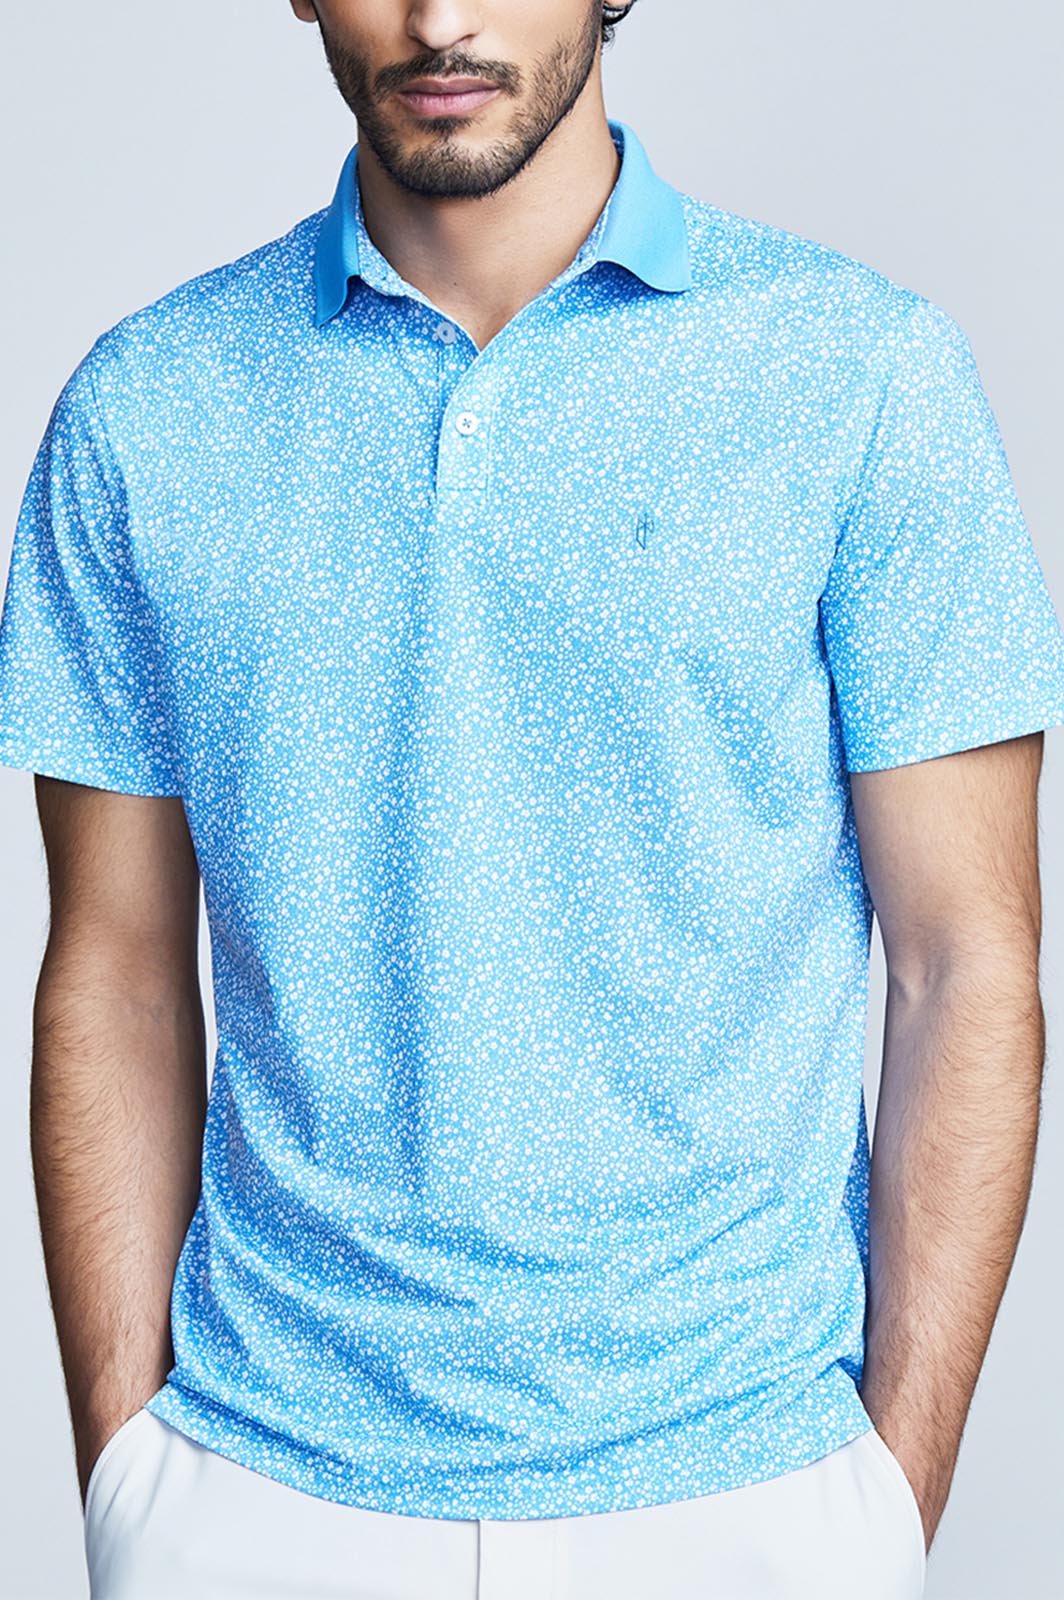 Men's Blue Flame Skull Polo Shirt - Casual, Stretchy, and Perfect for Summer